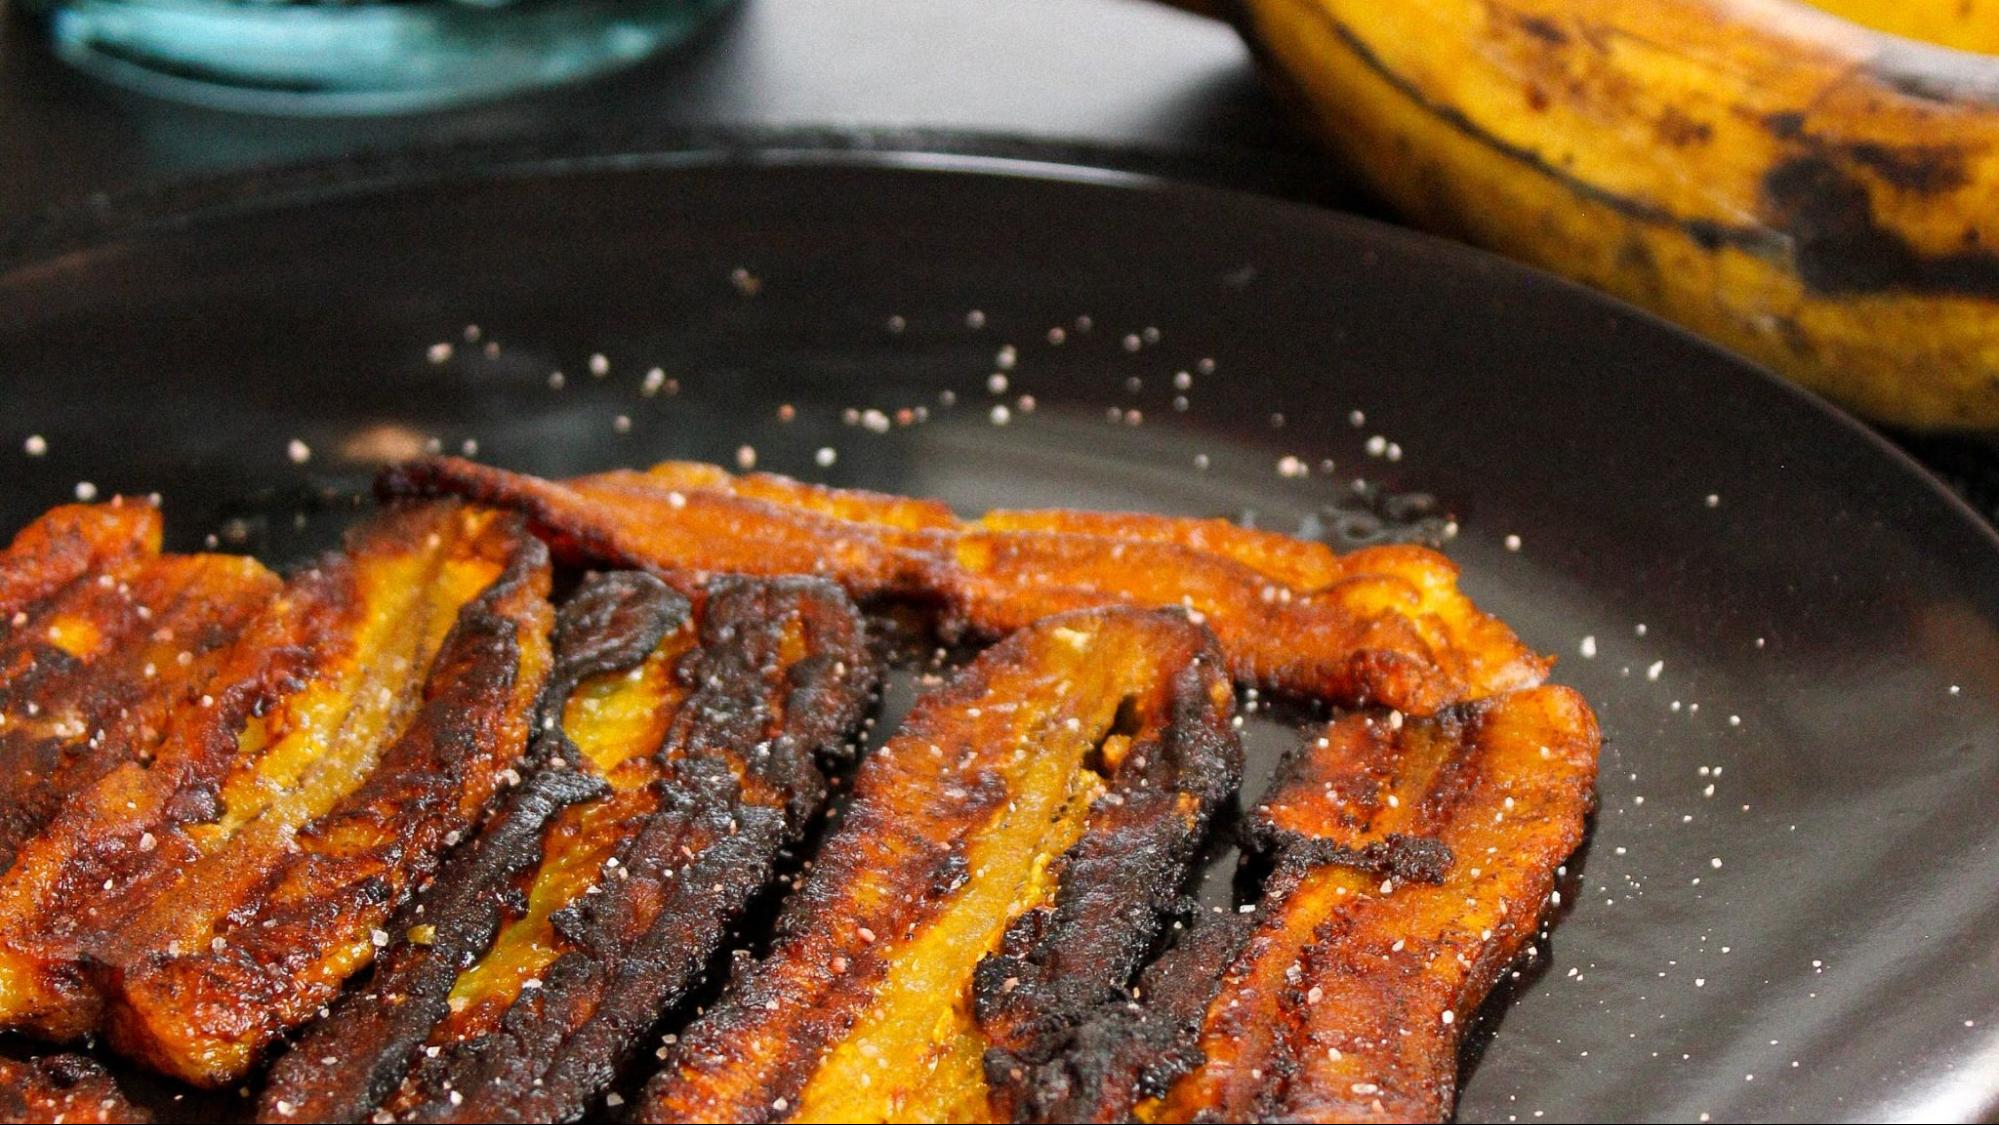 Fried plantains, with dusted powdered sugar, work wonders with V. Sattui 2016 Late Harvest Riesling.